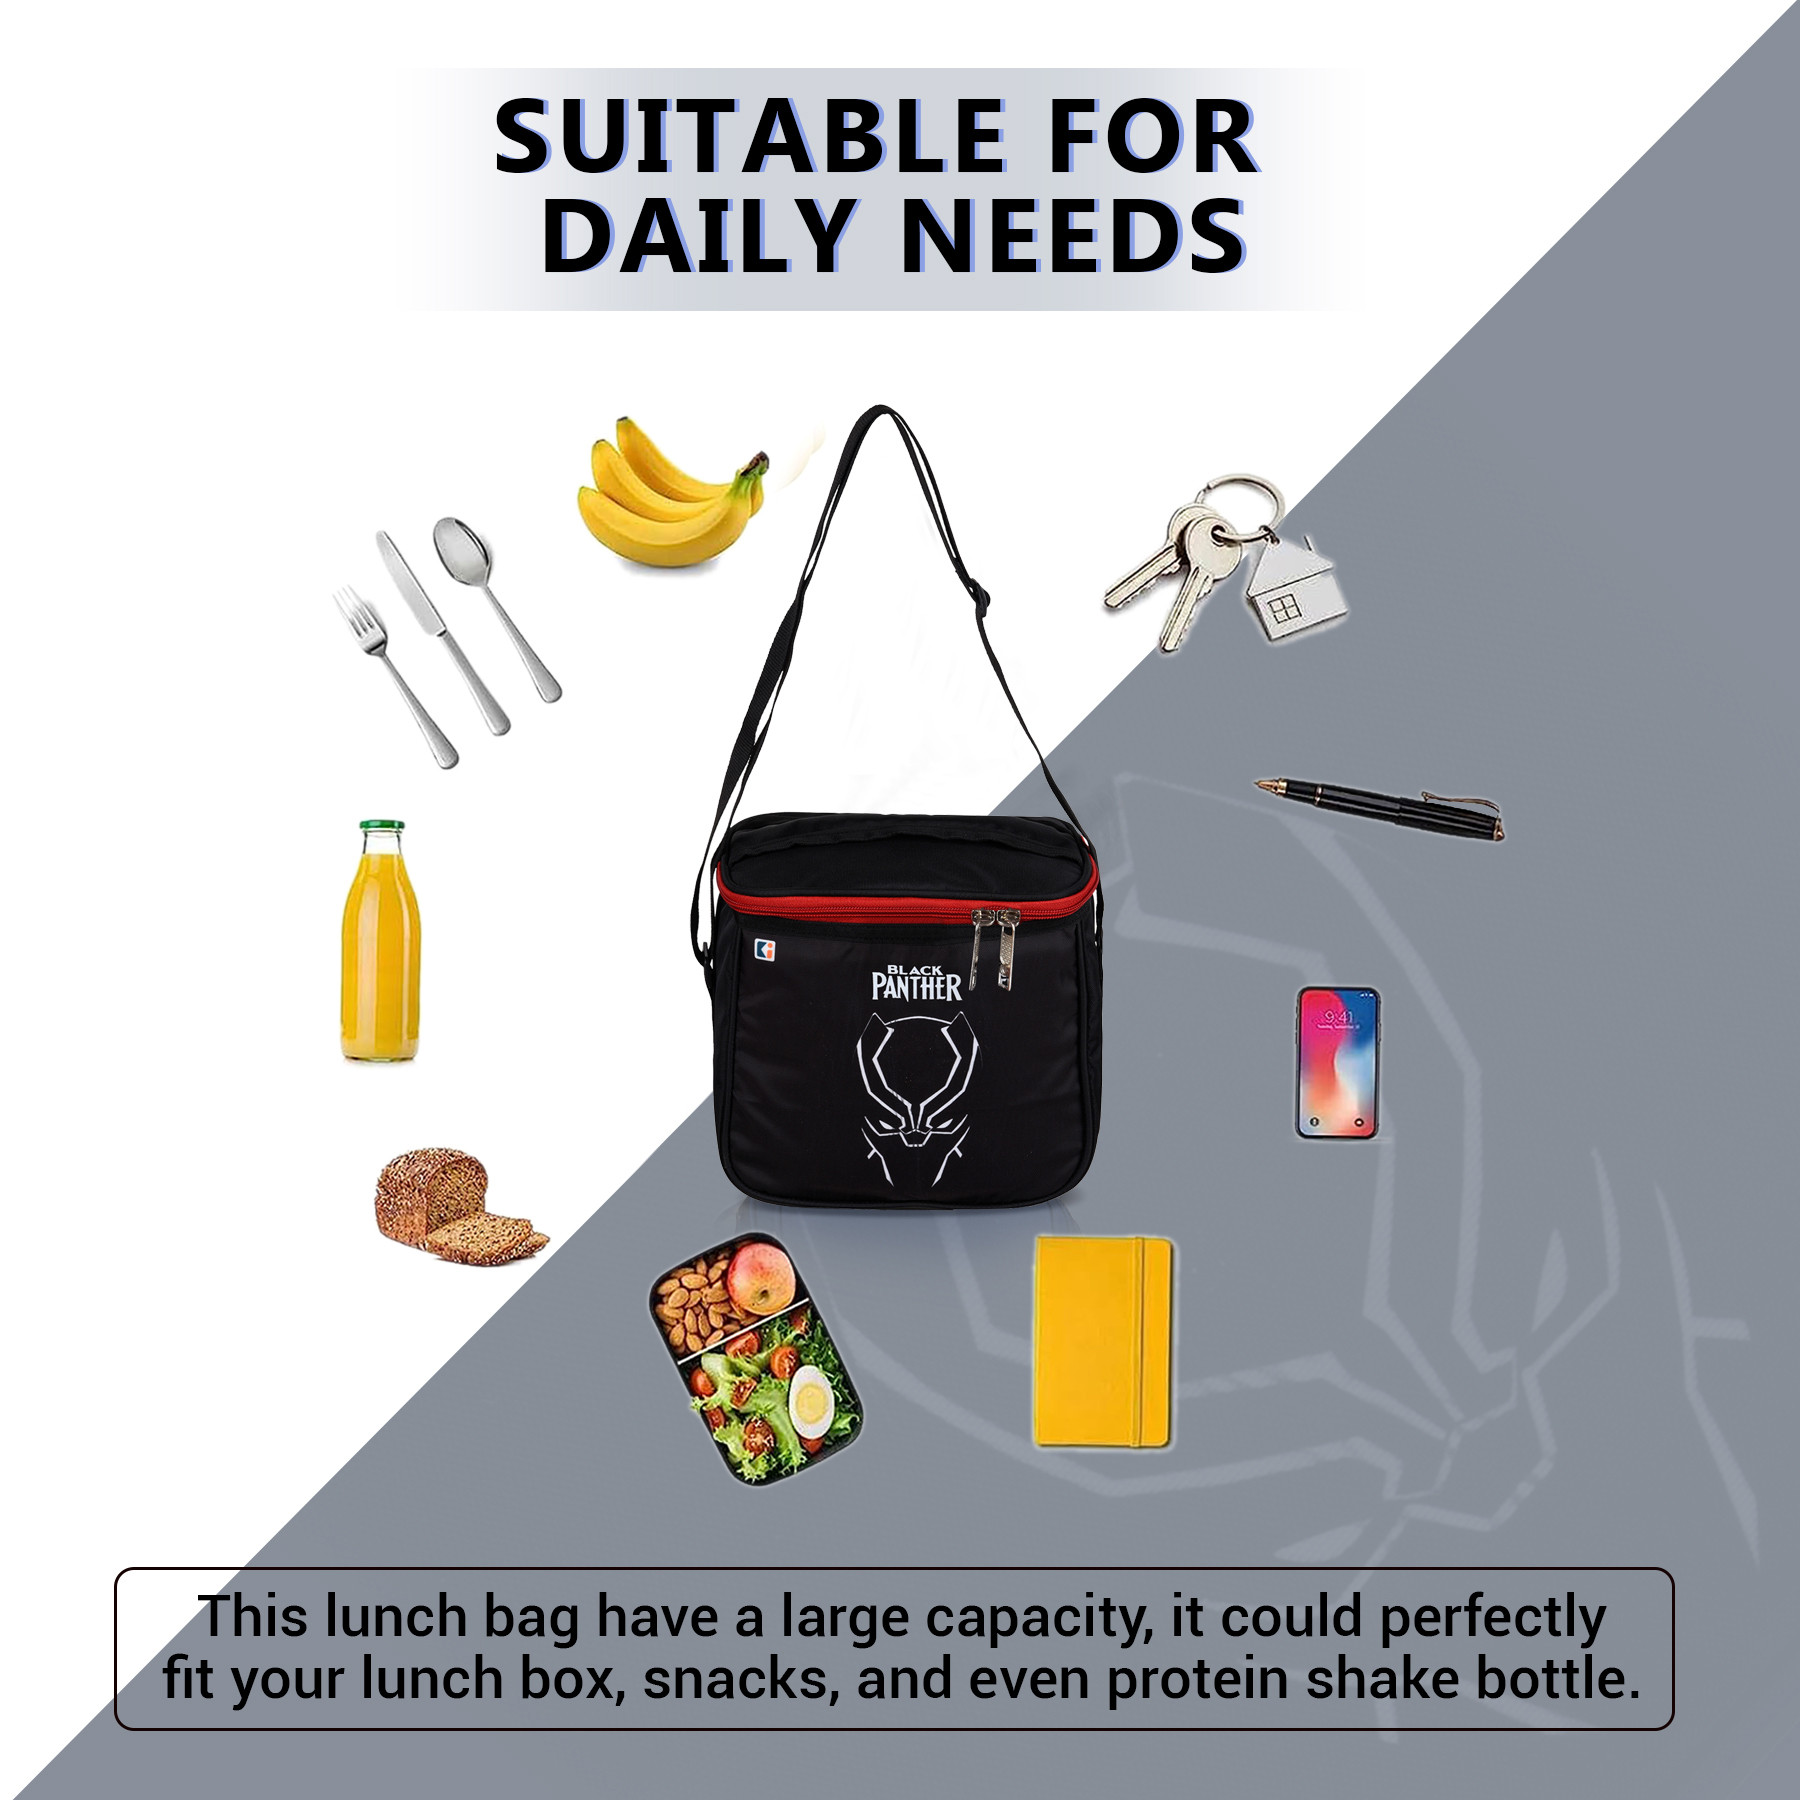 Kuber Industries Marvel Black Panther Lunch Bag | Rexine Waterproof Tiffin Cover | School Lunch Bag | Lunch Bag for Office | Kids Lunch Bag with Handle | Camping Lunch Bag | Black